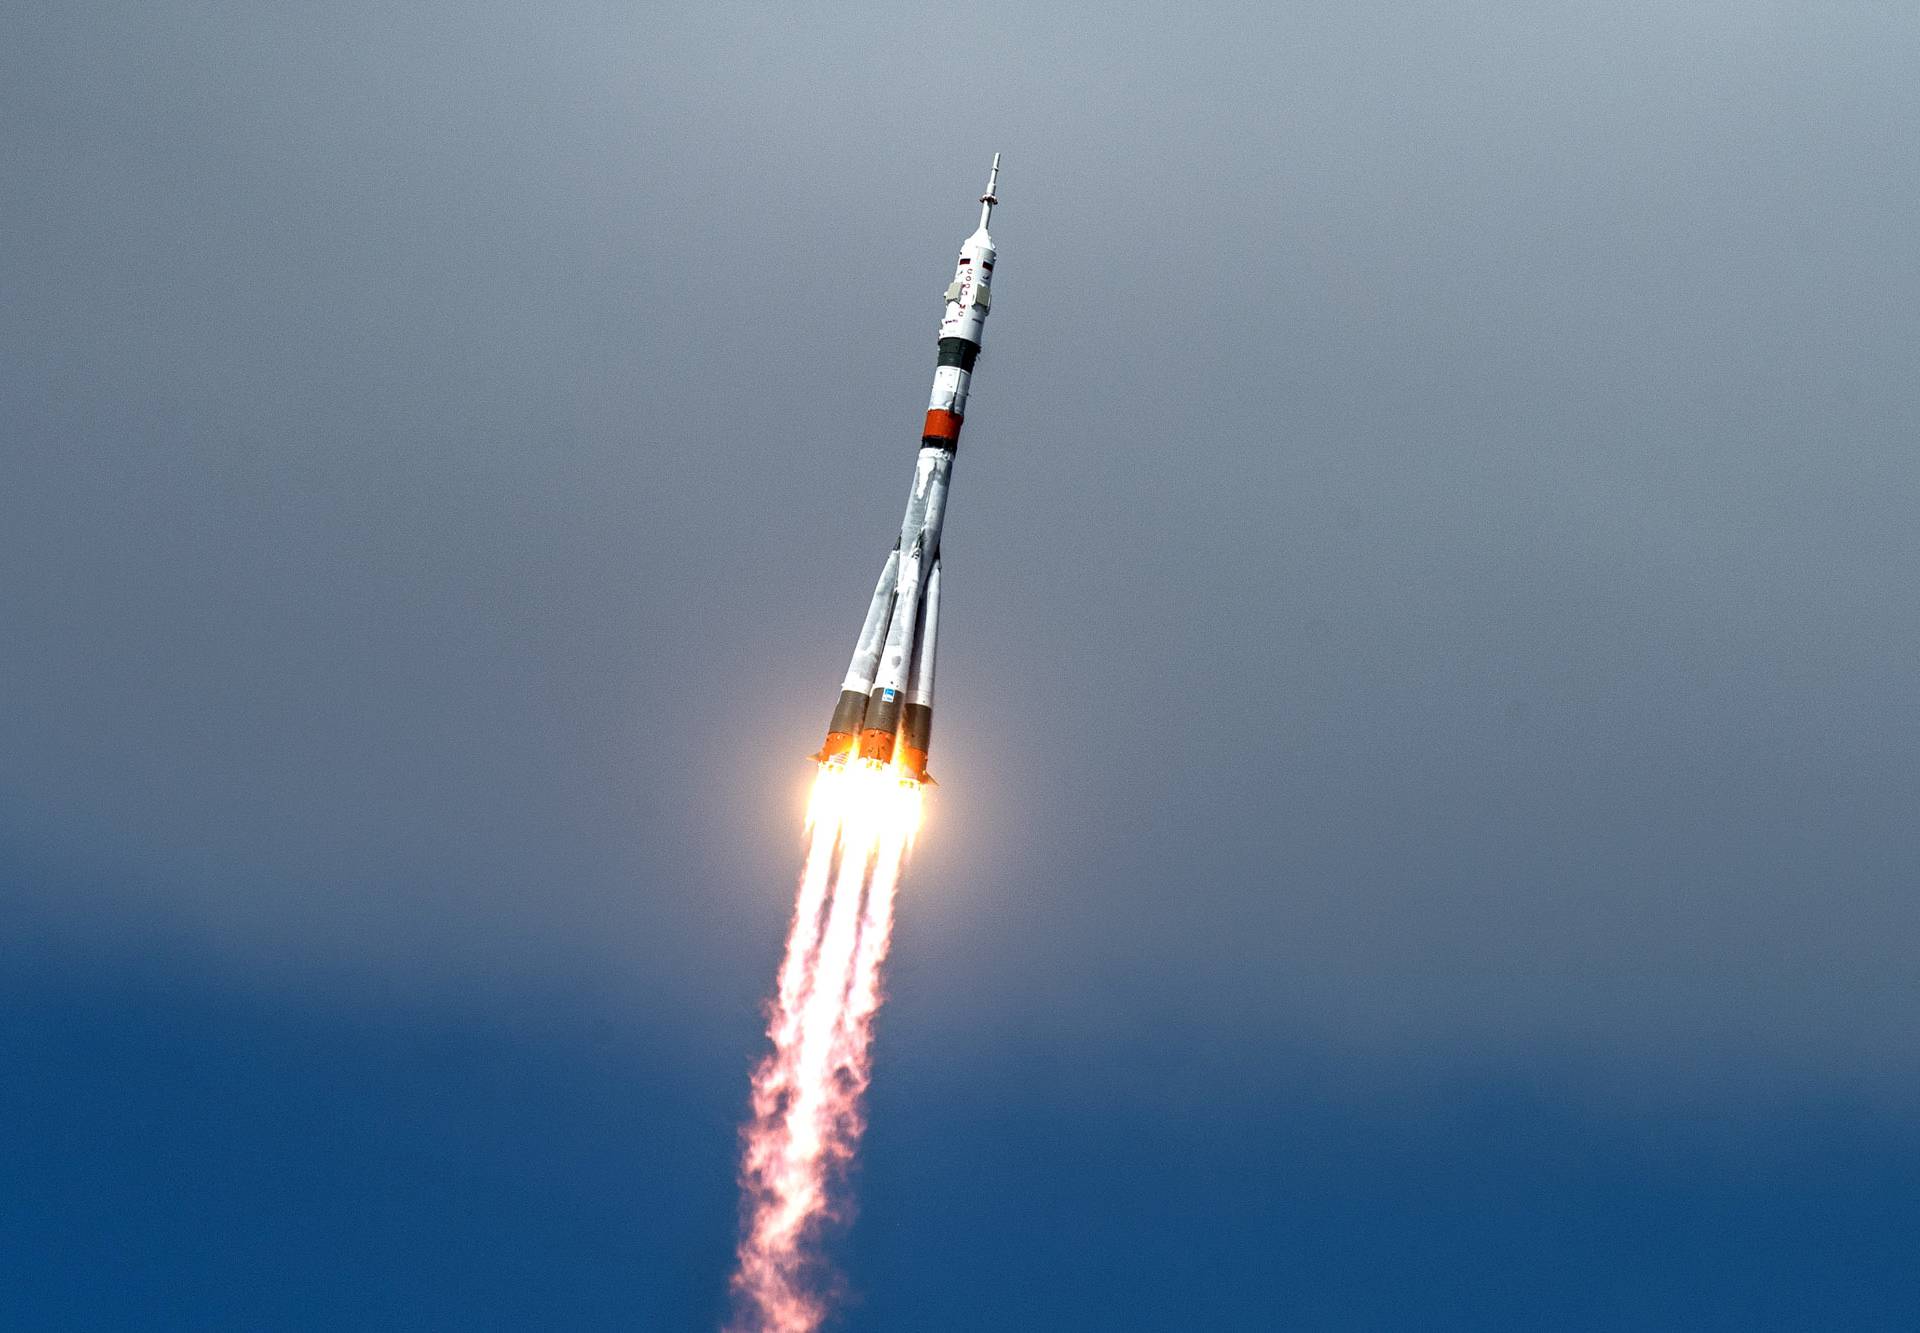 Soyuz MS-16 spacecraft carrying ISS crew blasts off from the launchpad at the Baikonur Cosmodrome